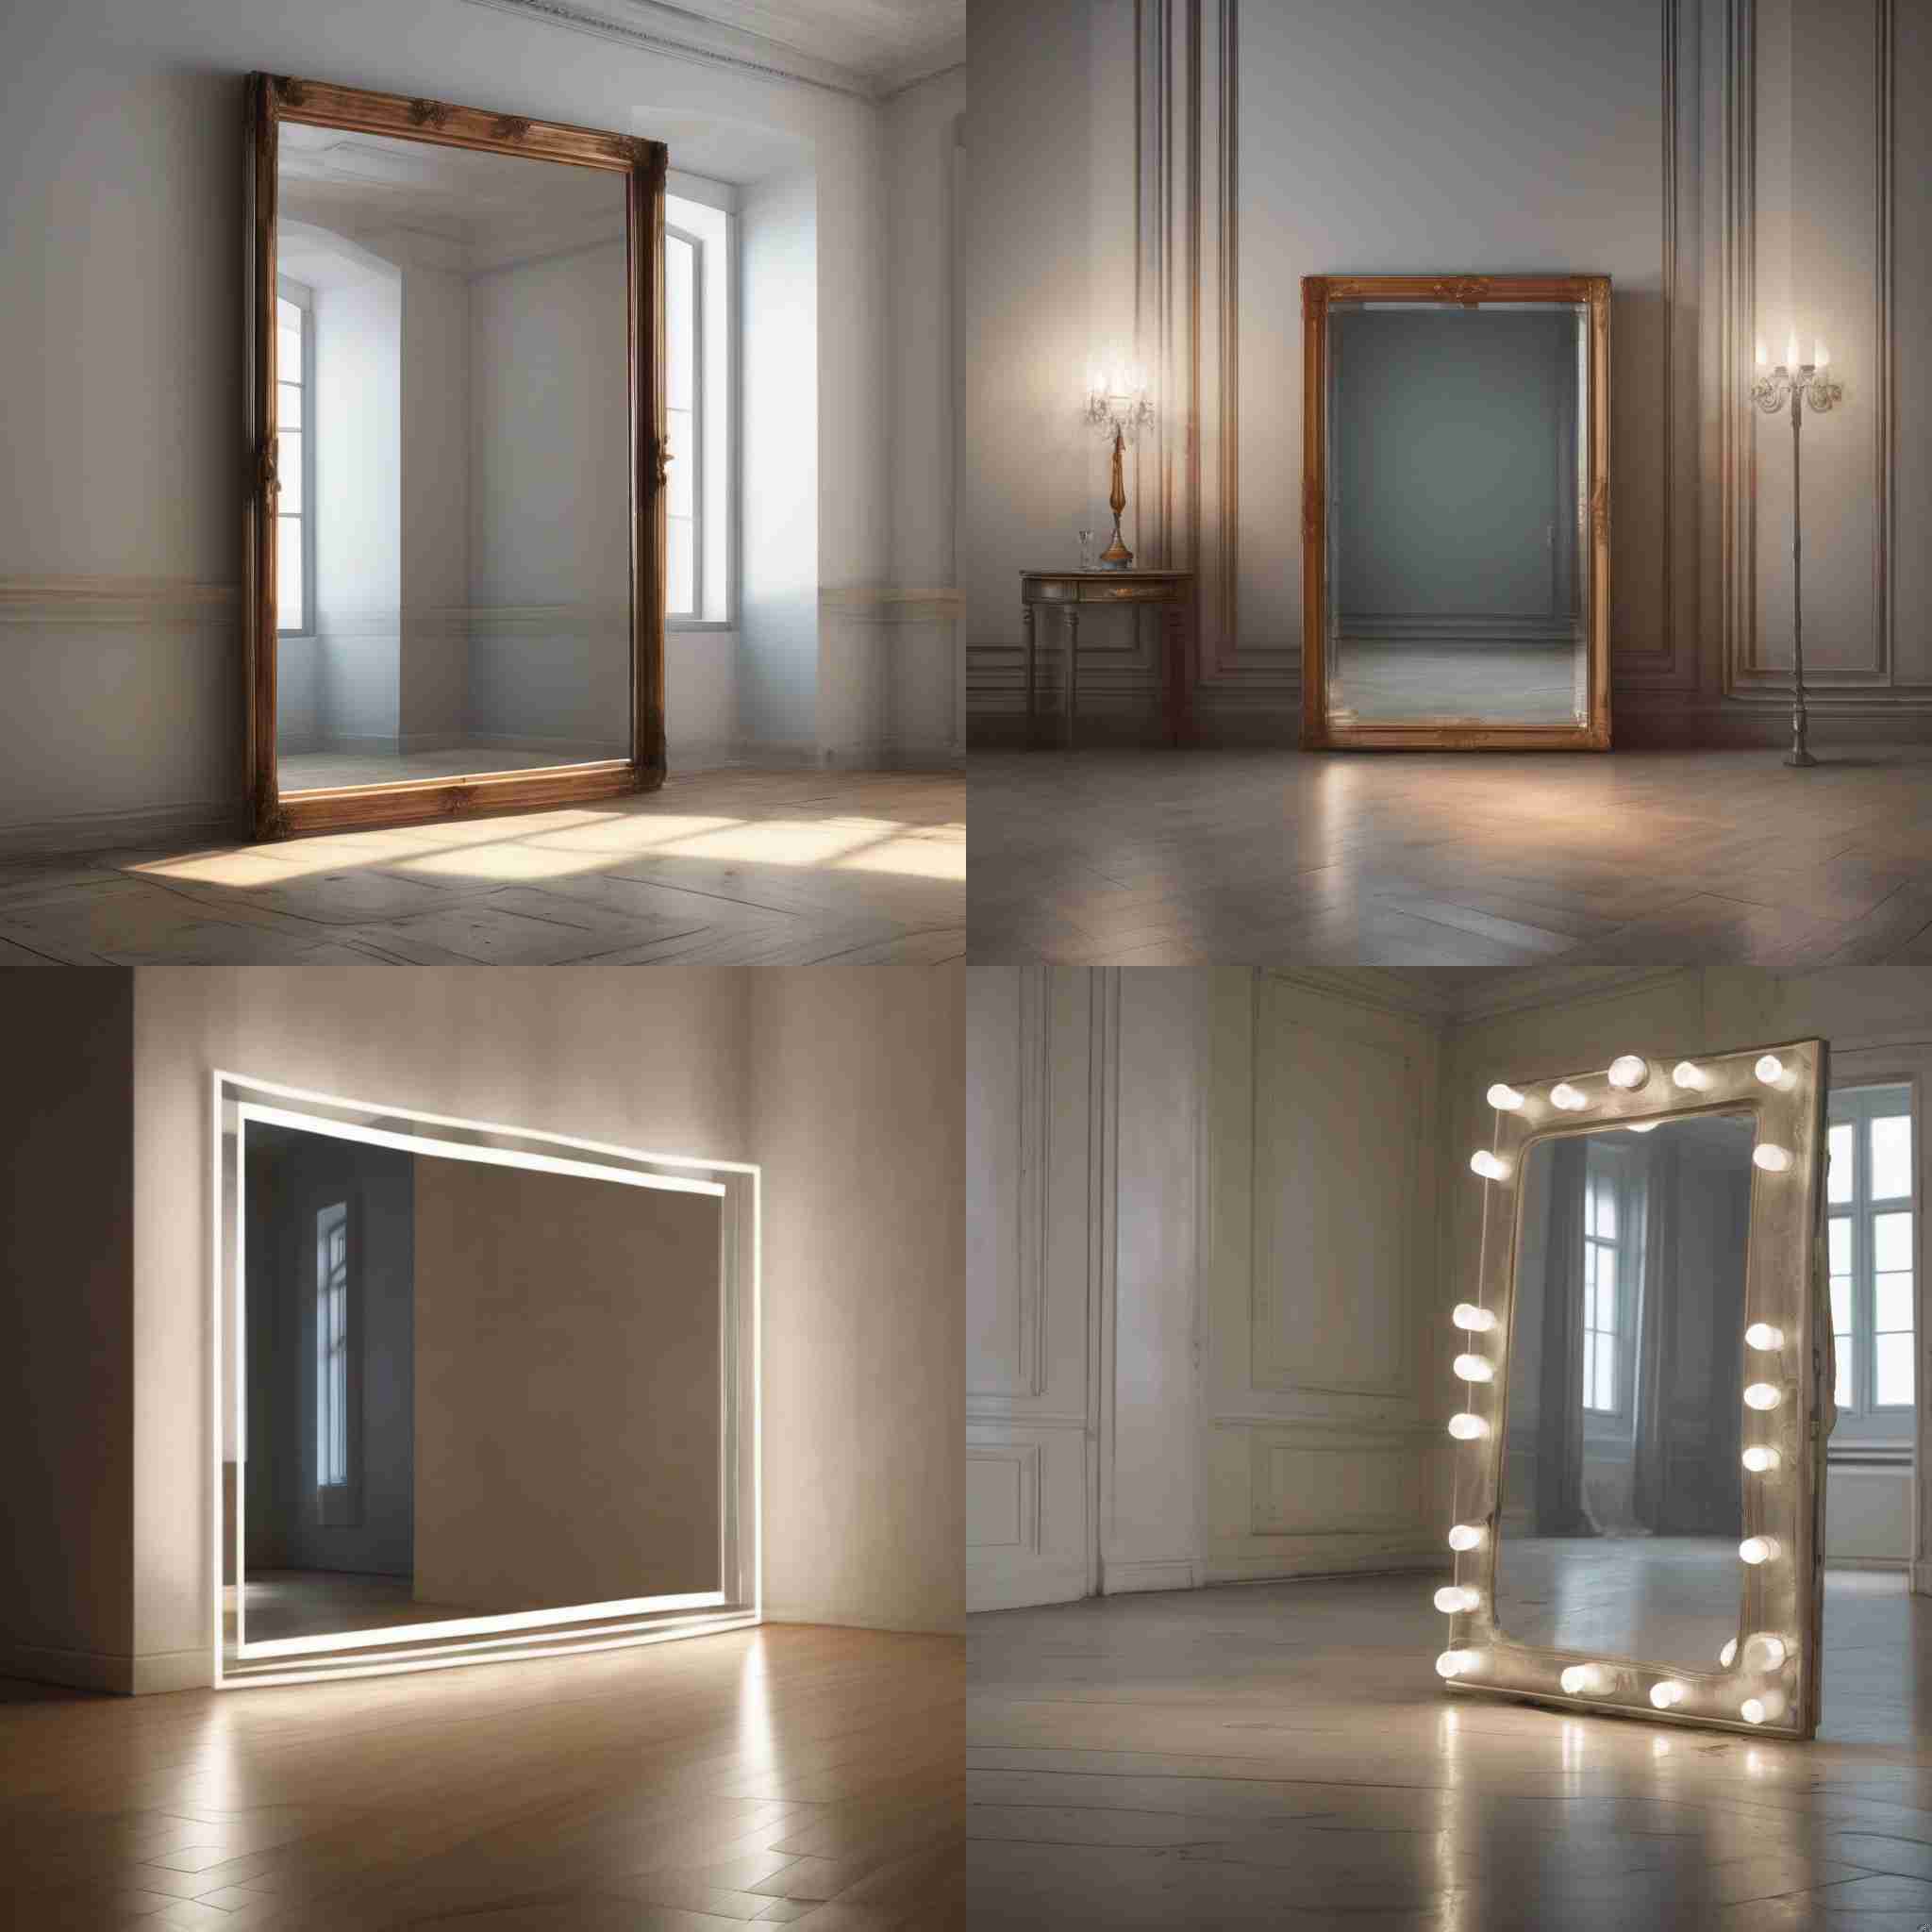 A mirror in a room with light